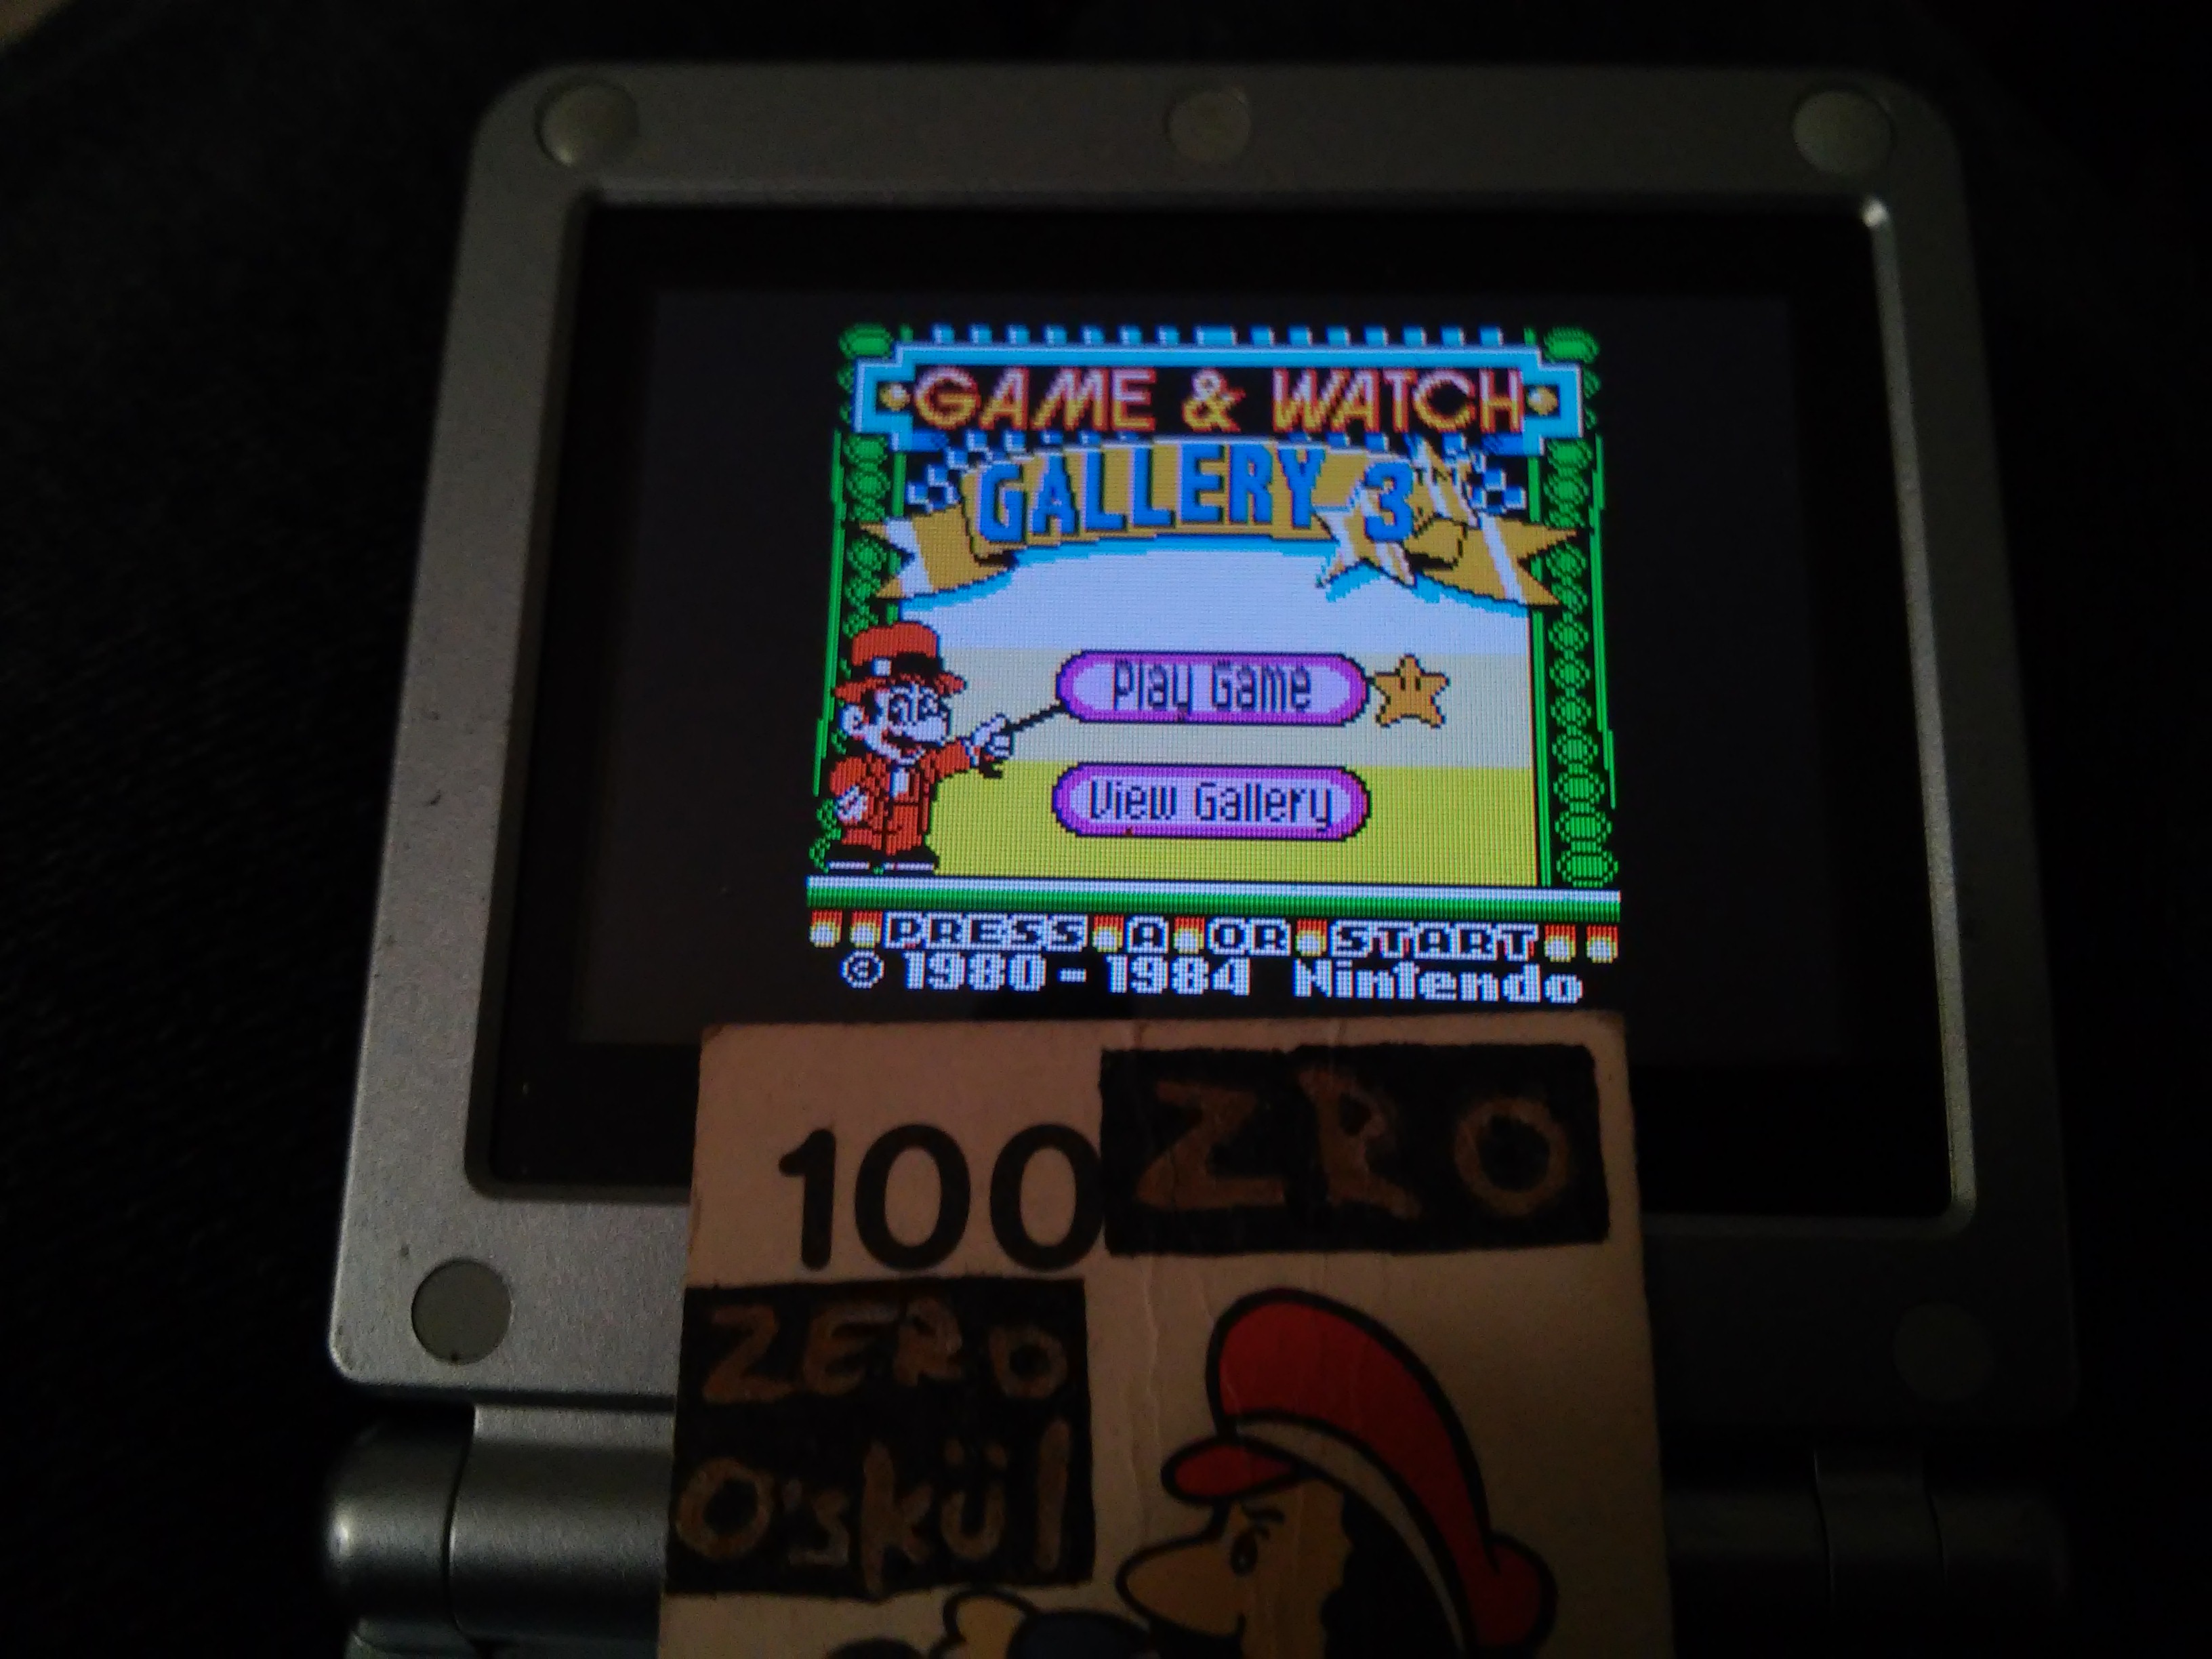 zerooskul: Game & Watch Gallery 3: Flagman [Classic: Game A] (Game Boy Color) 44 points on 2019-03-11 03:15:20